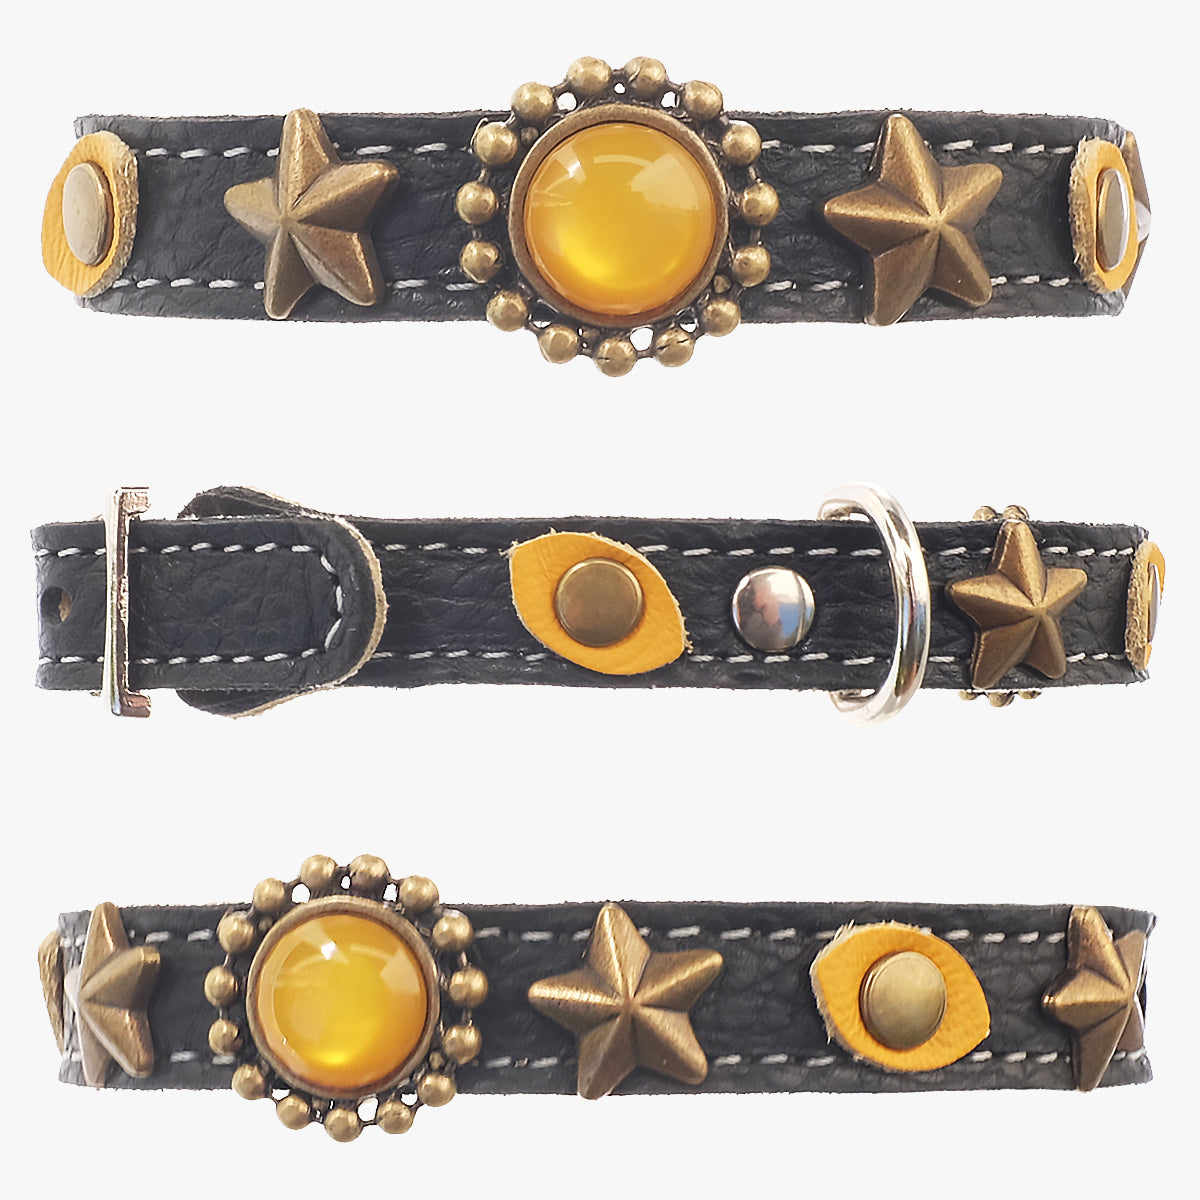 Superpipapo Black Leather Cat Collar, With Stars, Yellow Stones & Cats-Eyes Patches | at Made Moggie